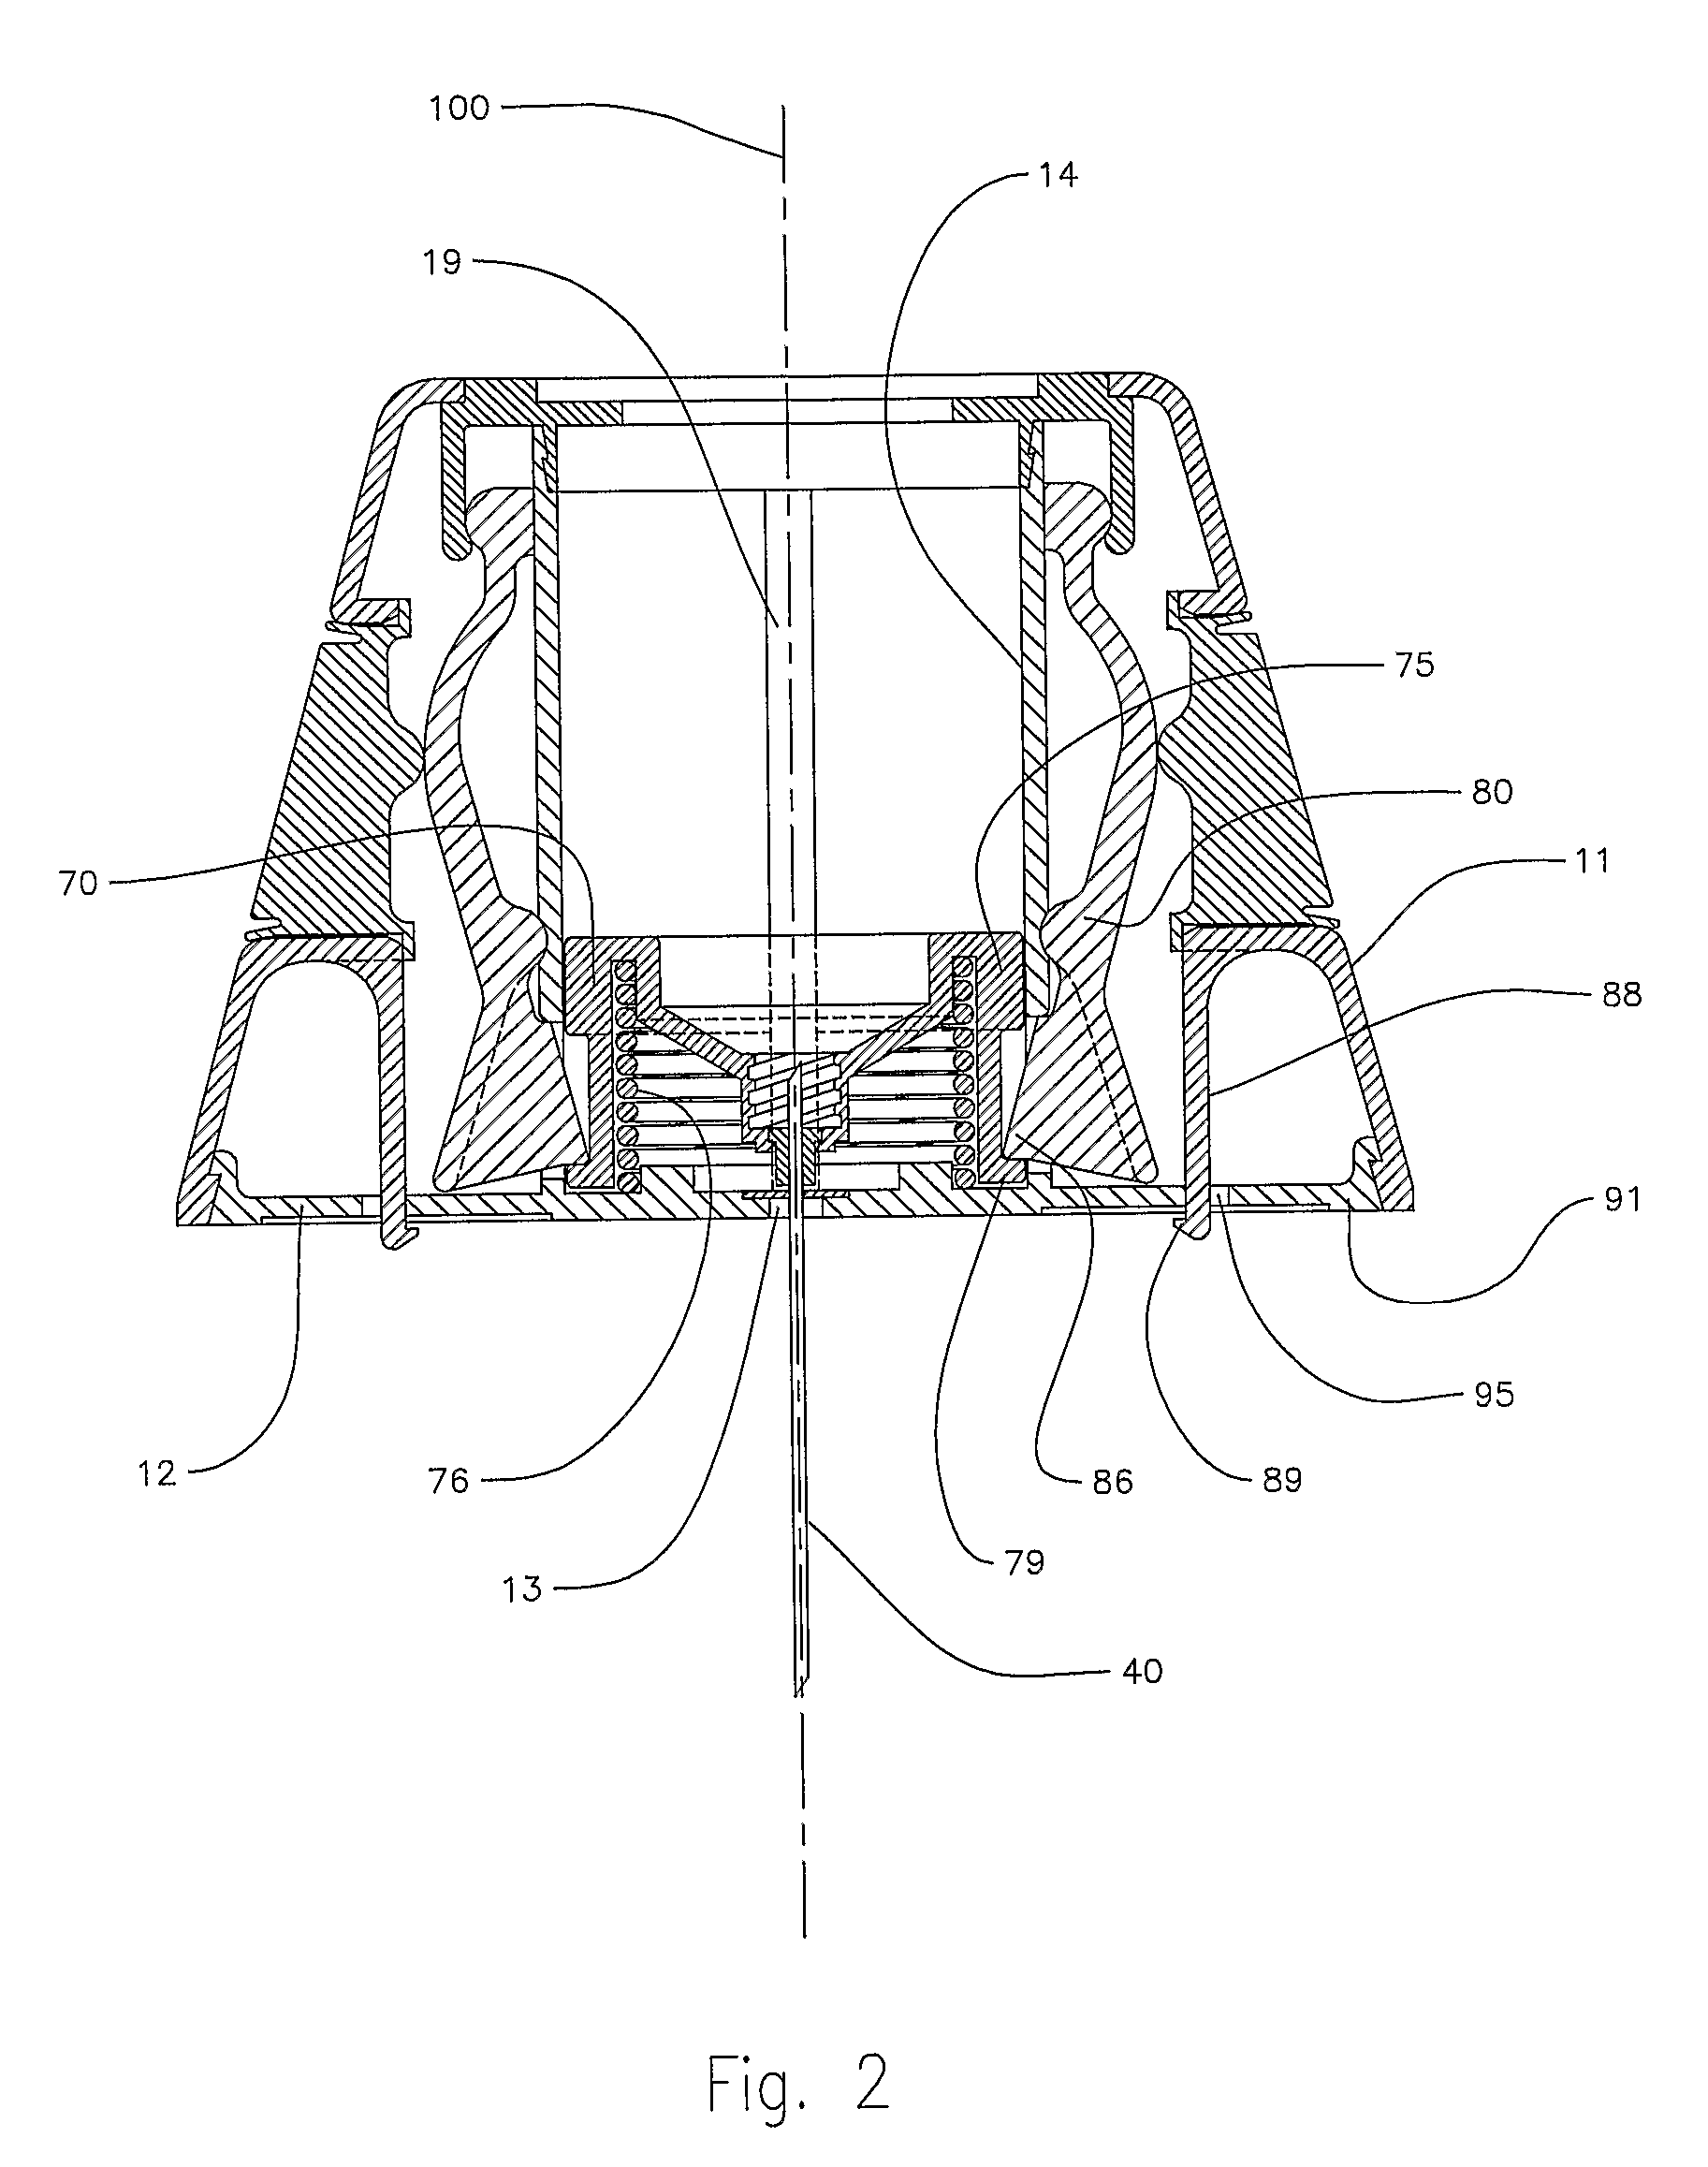 Injection device for administering a vaccine